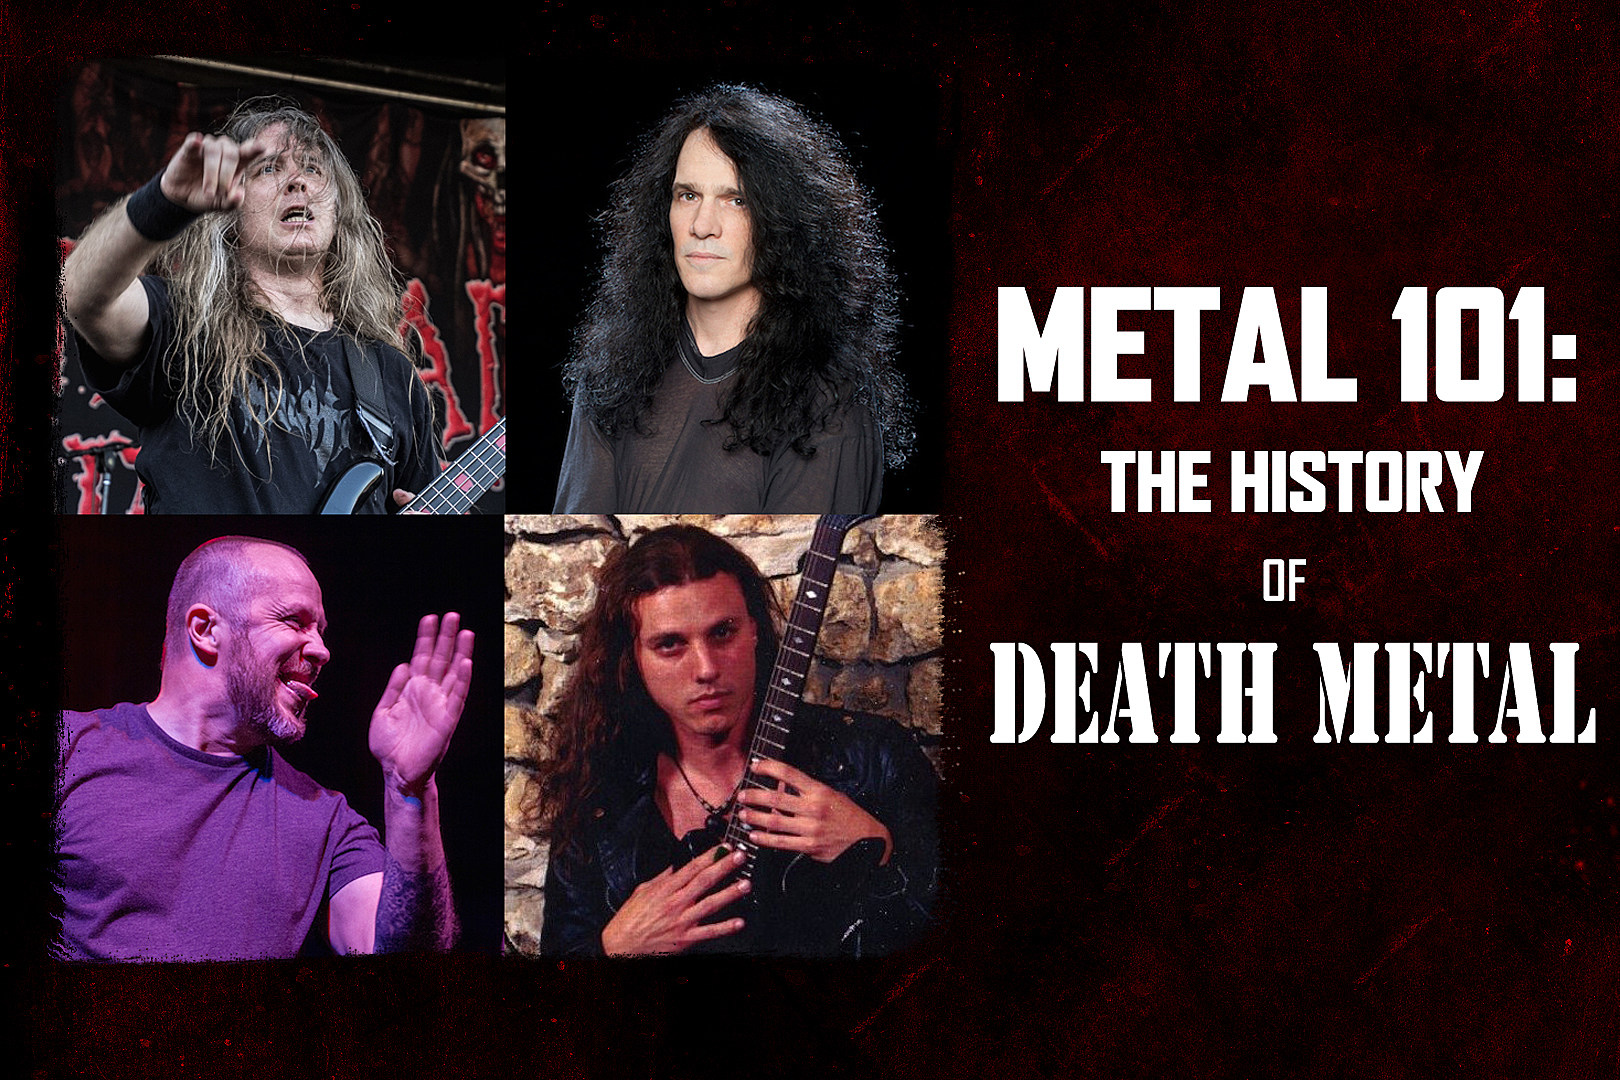 Heavy Metal 101: The History of Death Metal